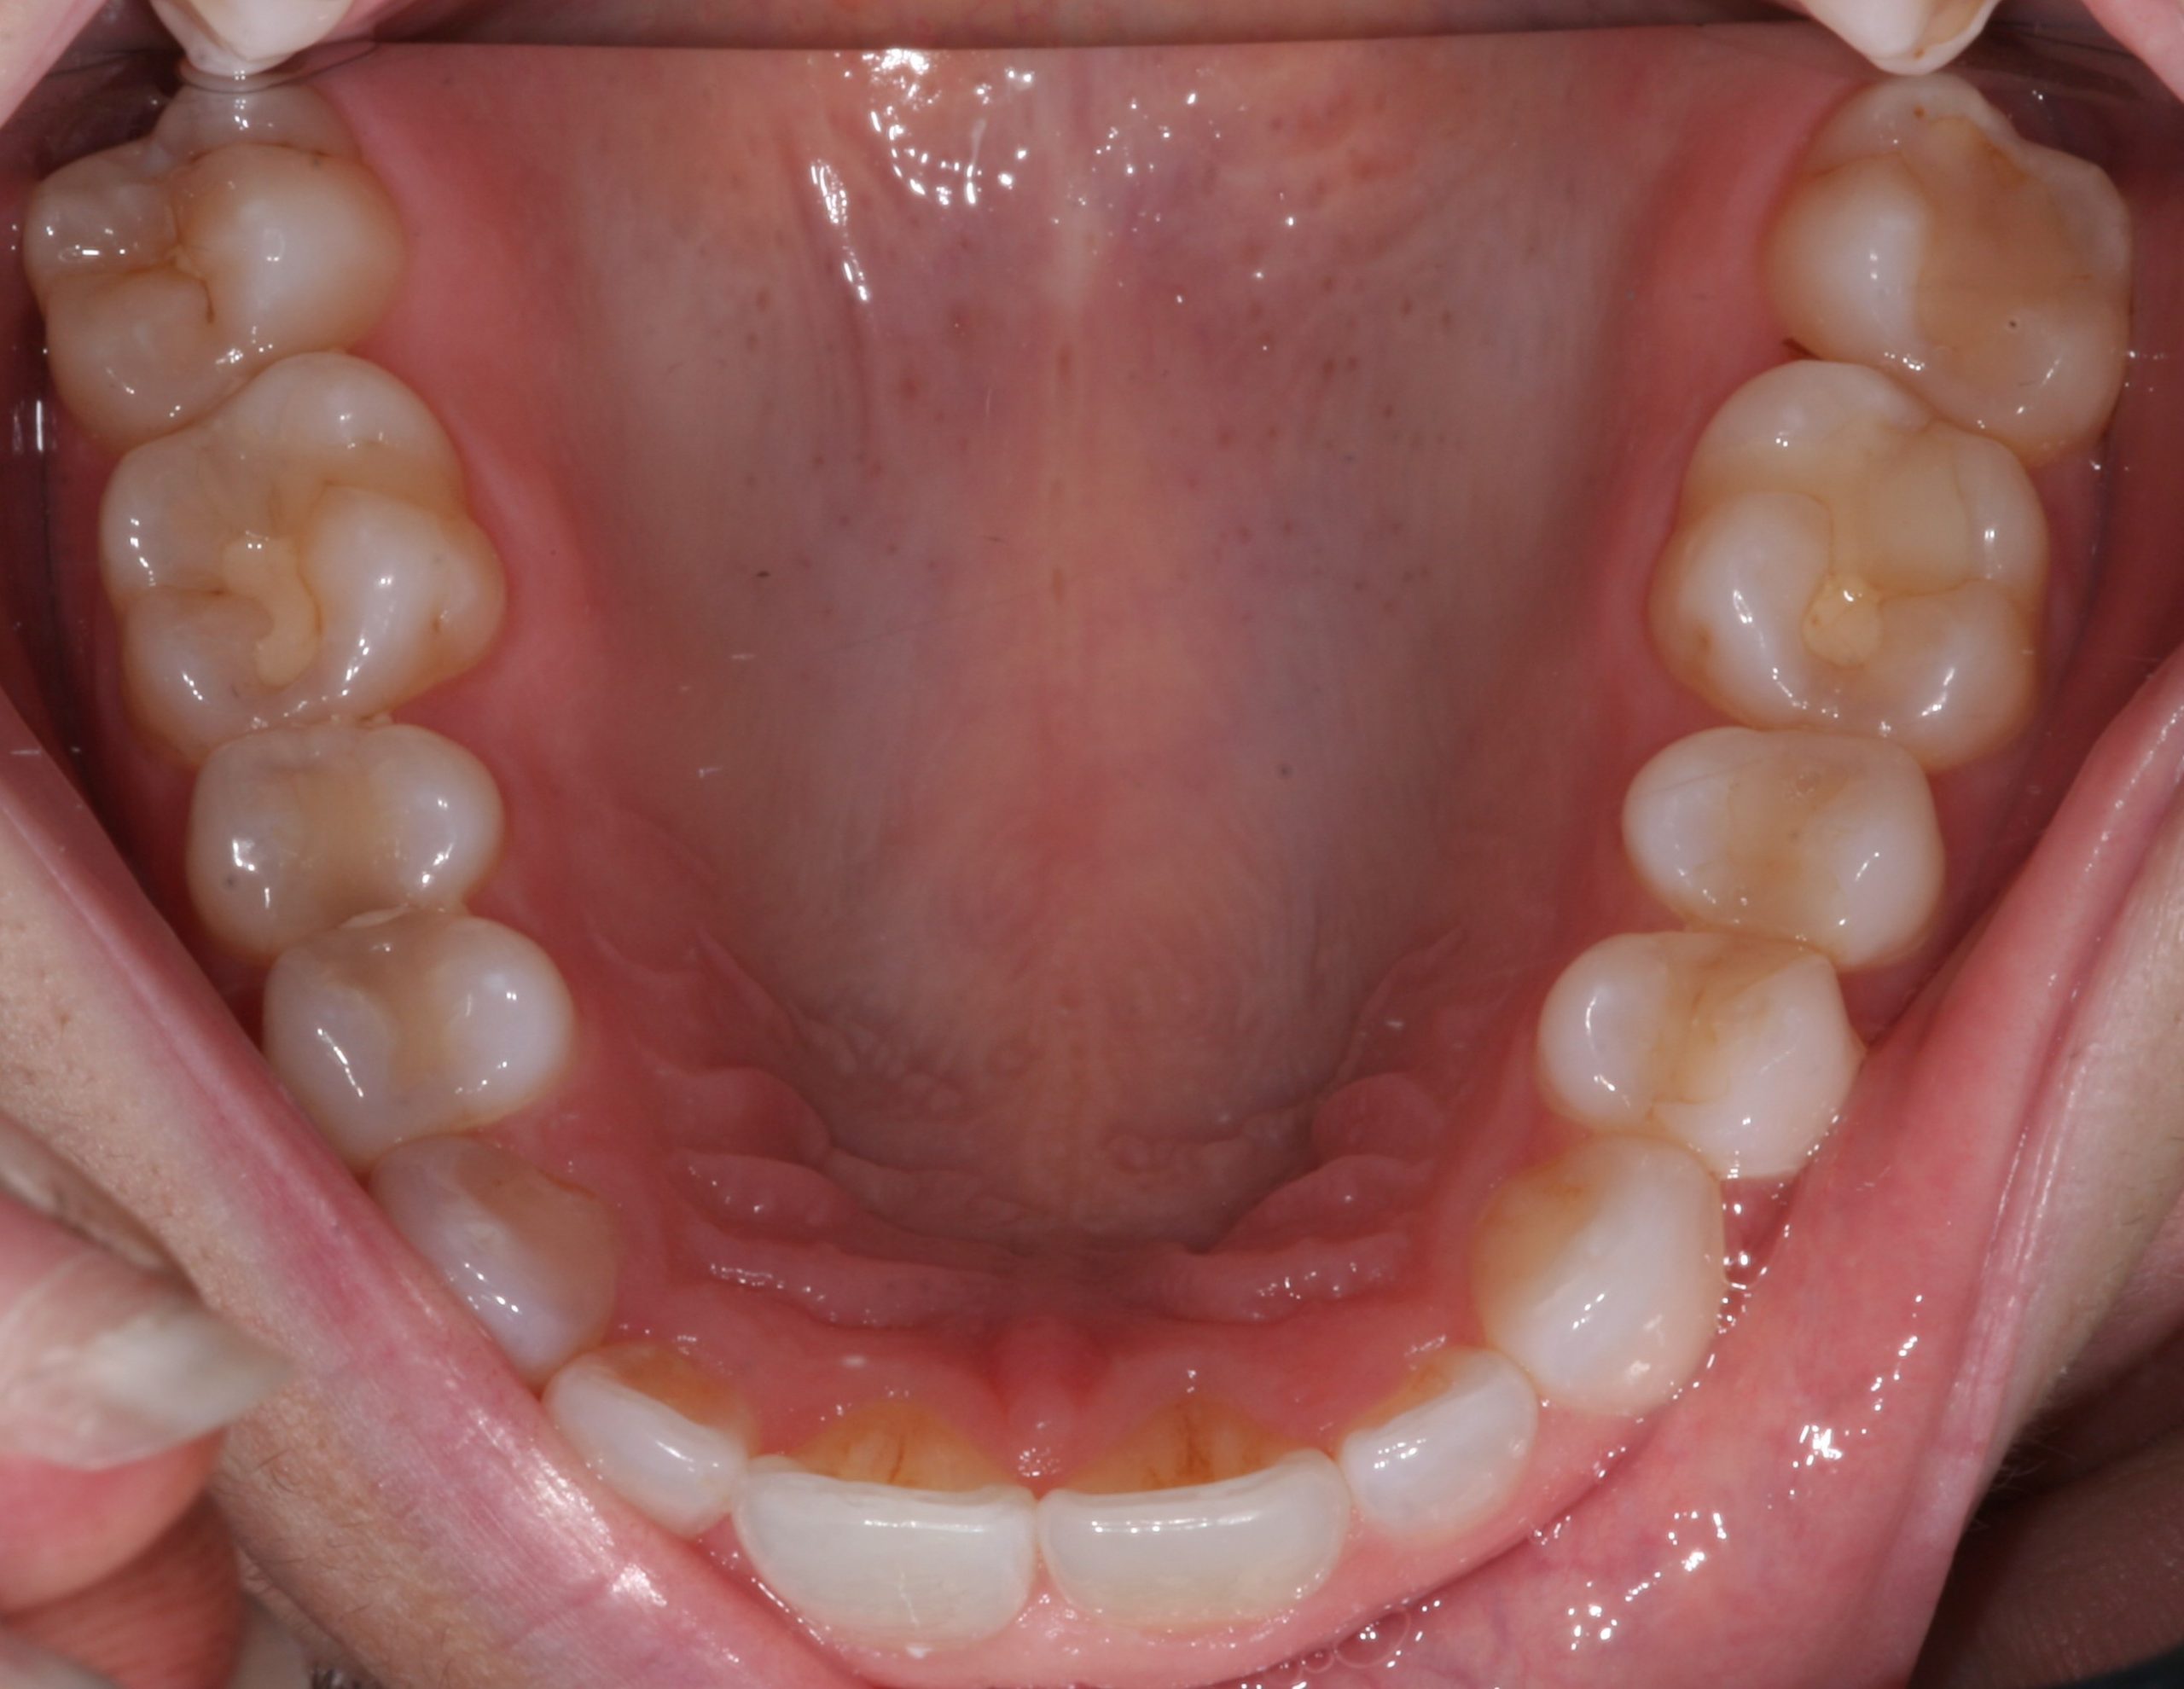 Patient's straight top row teeth after dental work.